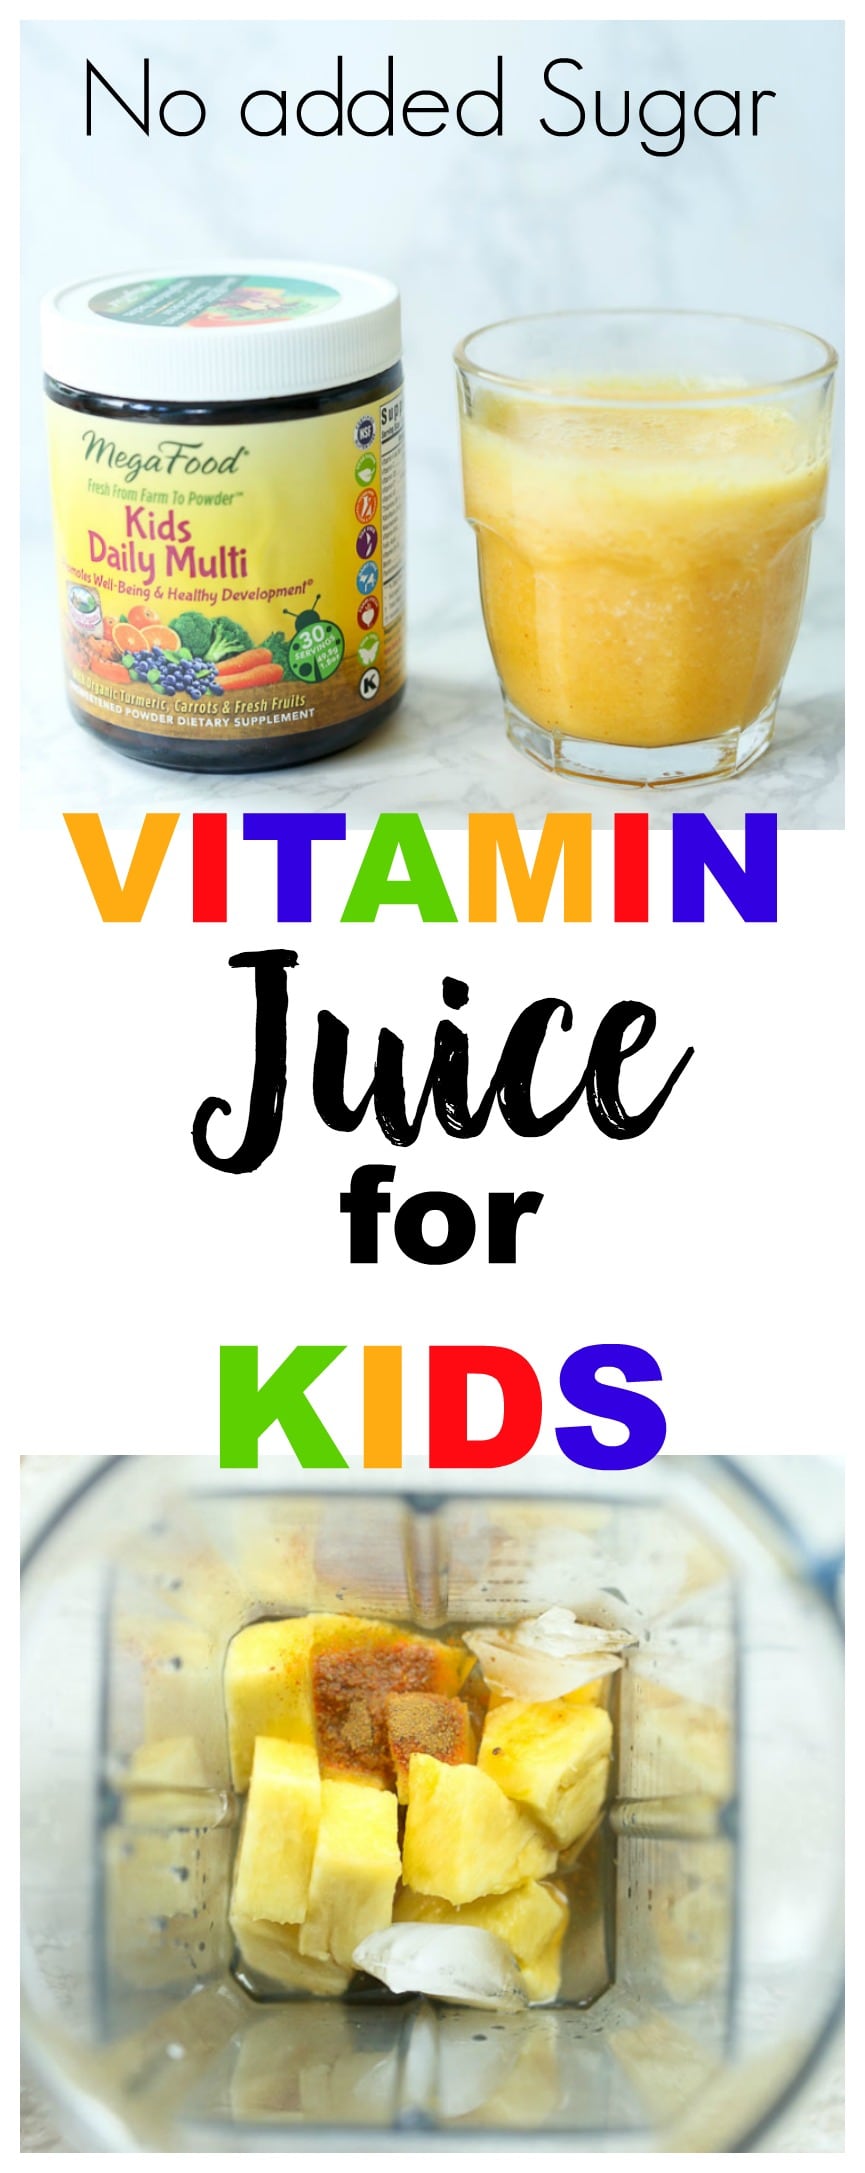 MegaFood Kids Daily Multi Review Vitamin Juice for Kids 